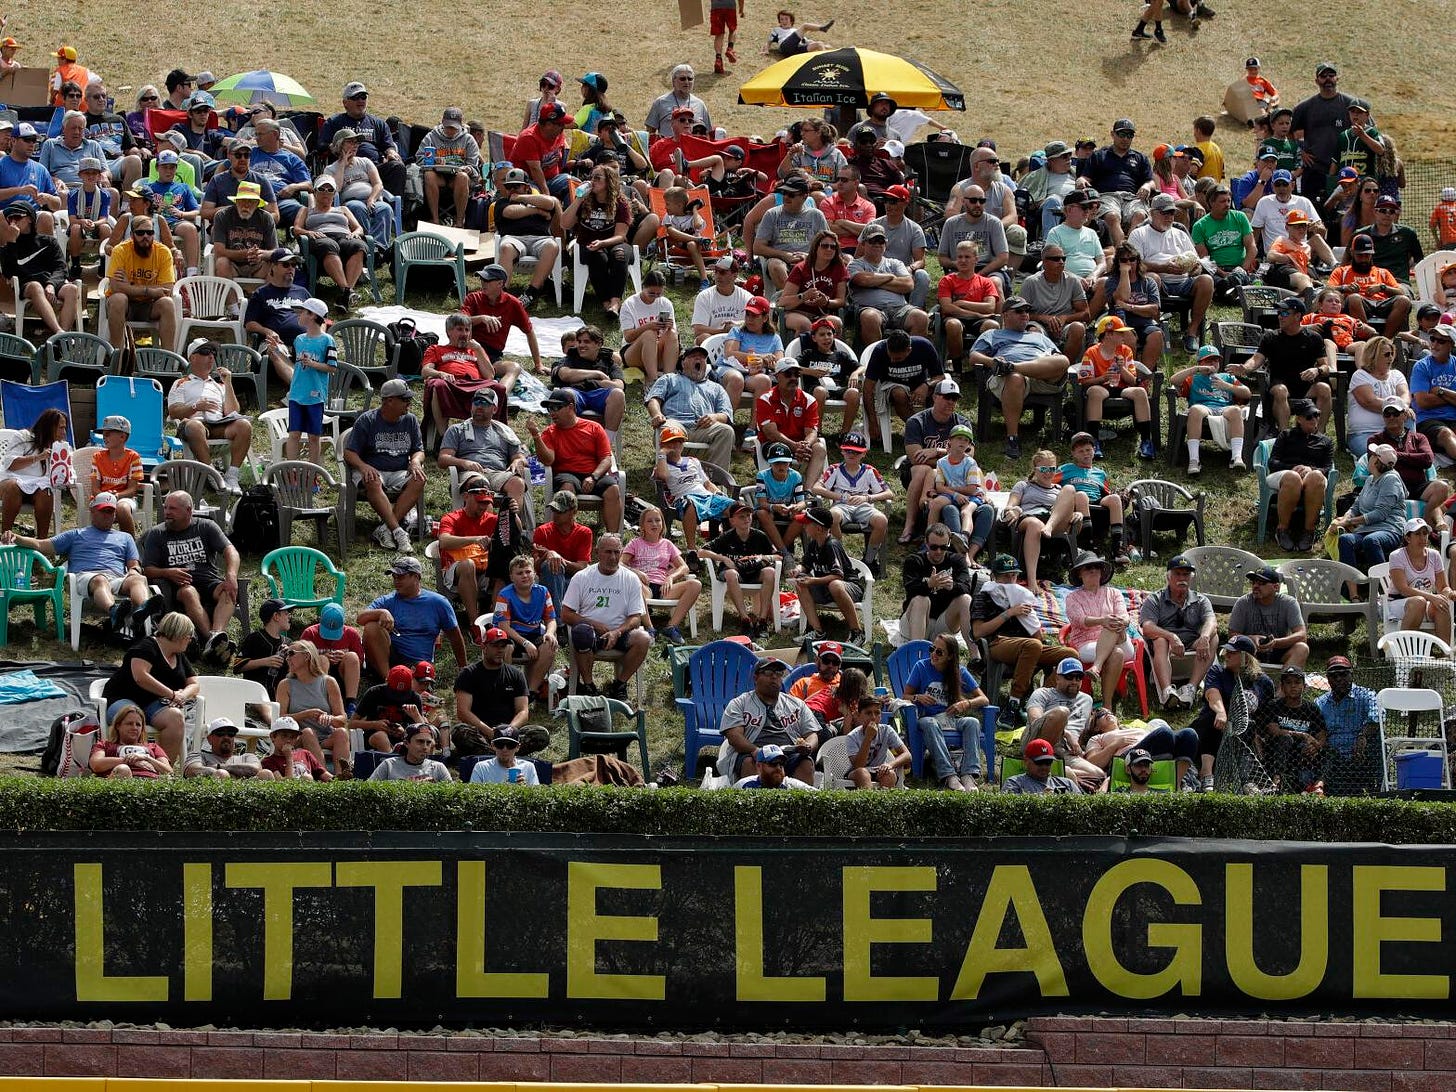 Little League World Series admission costs